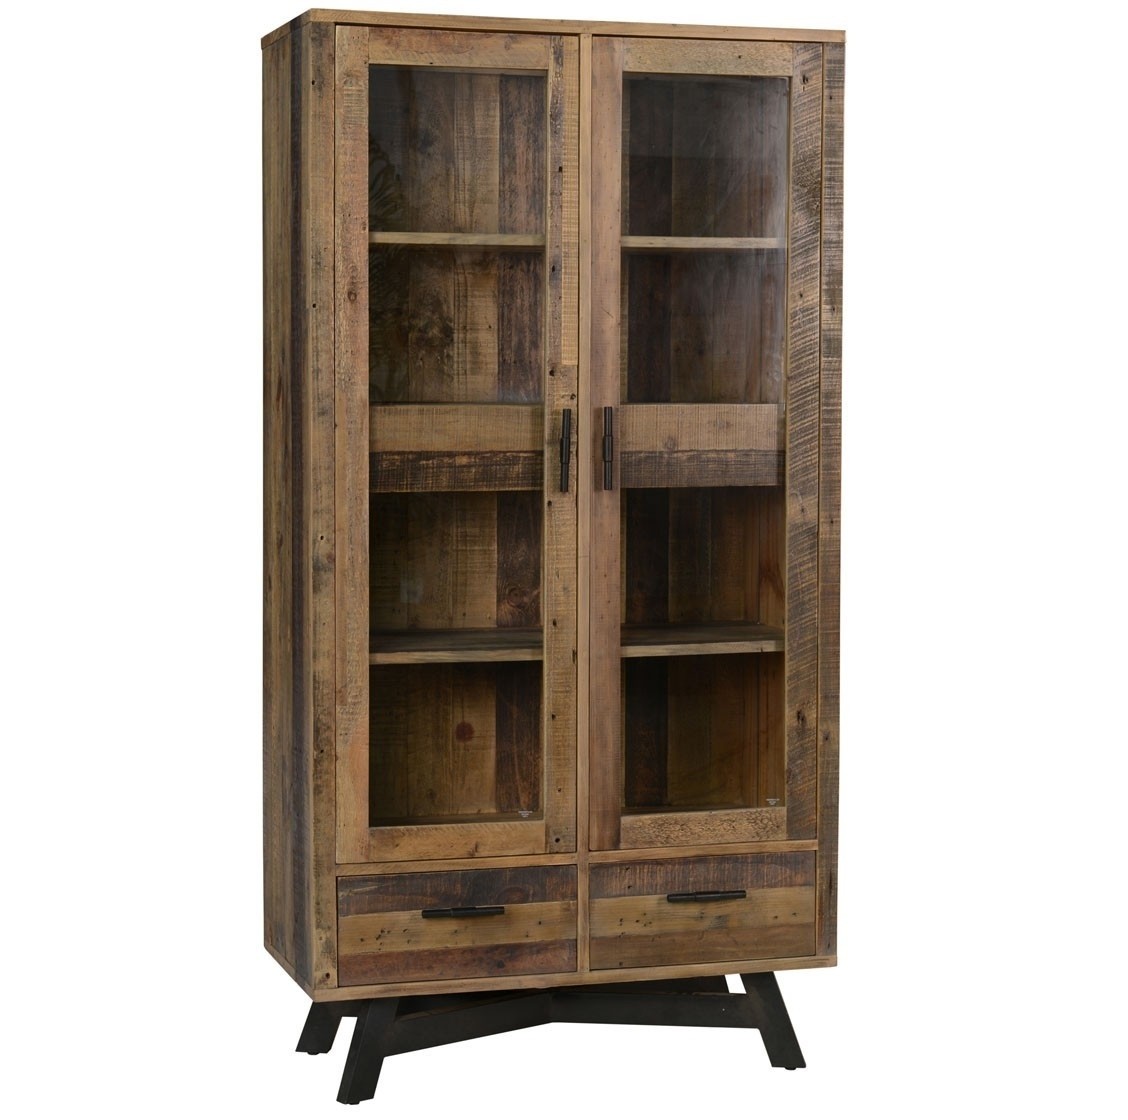 Farmhouse rustic reclaimed wood curio cabinet with doors